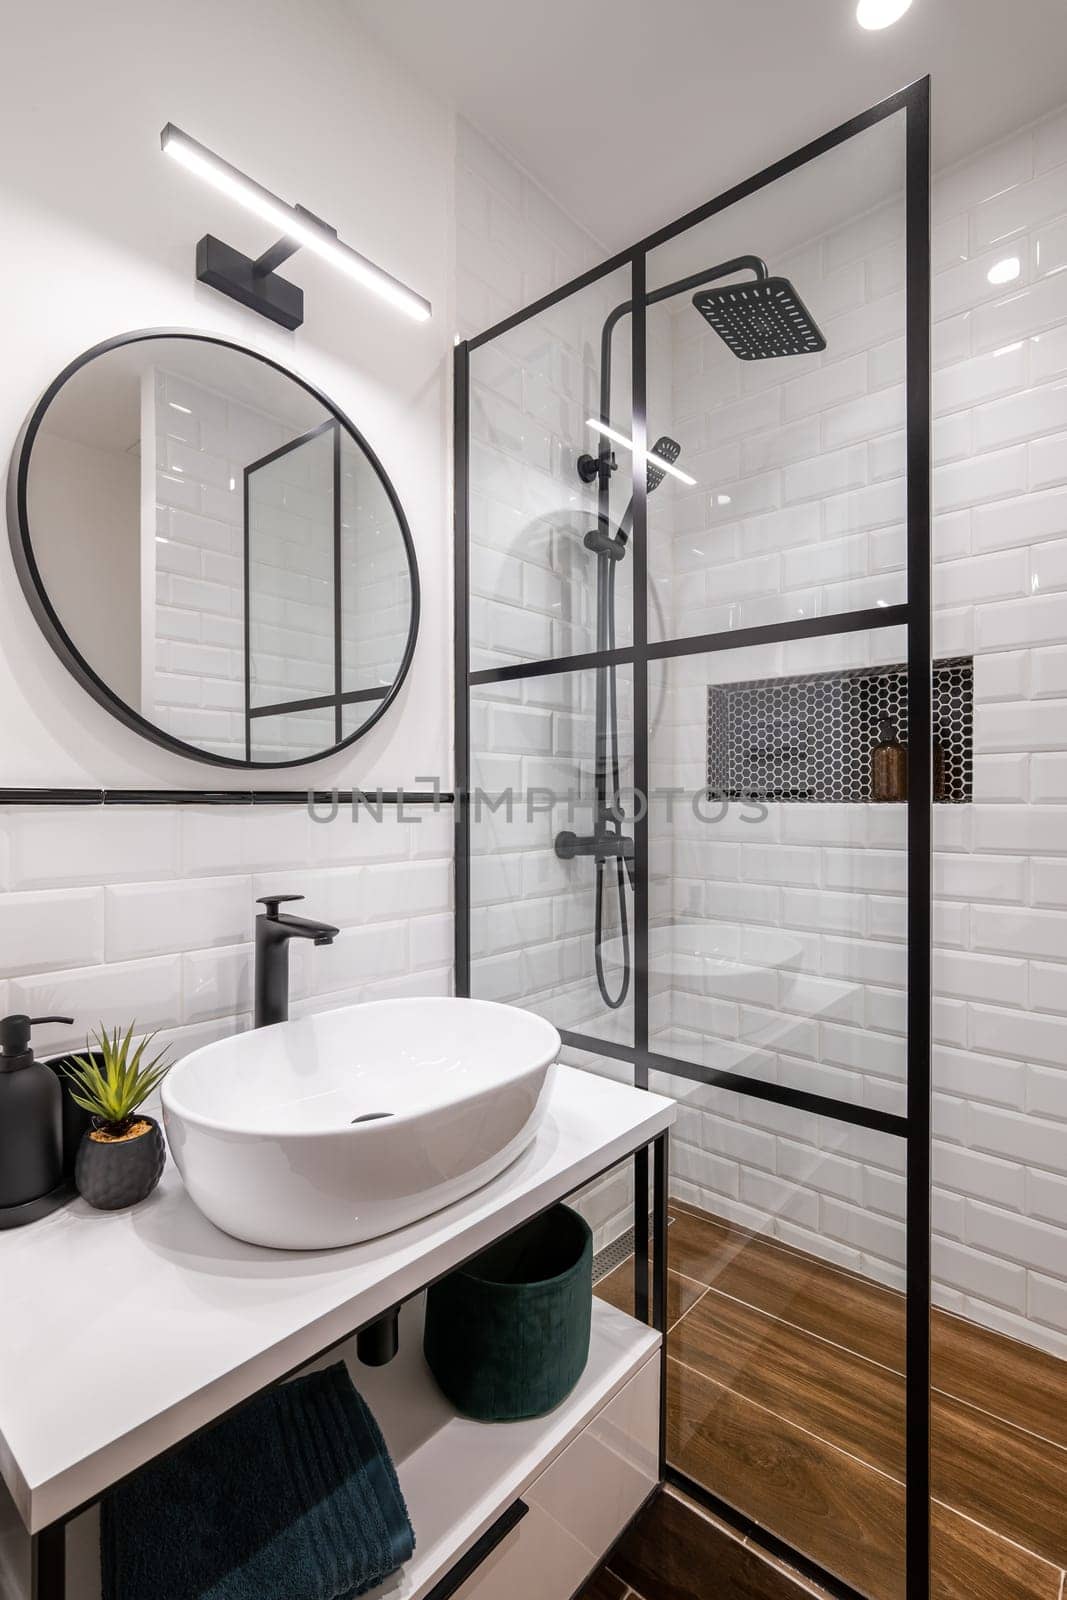 Simple bathroom with black shower, round mirror and classic white tiles.